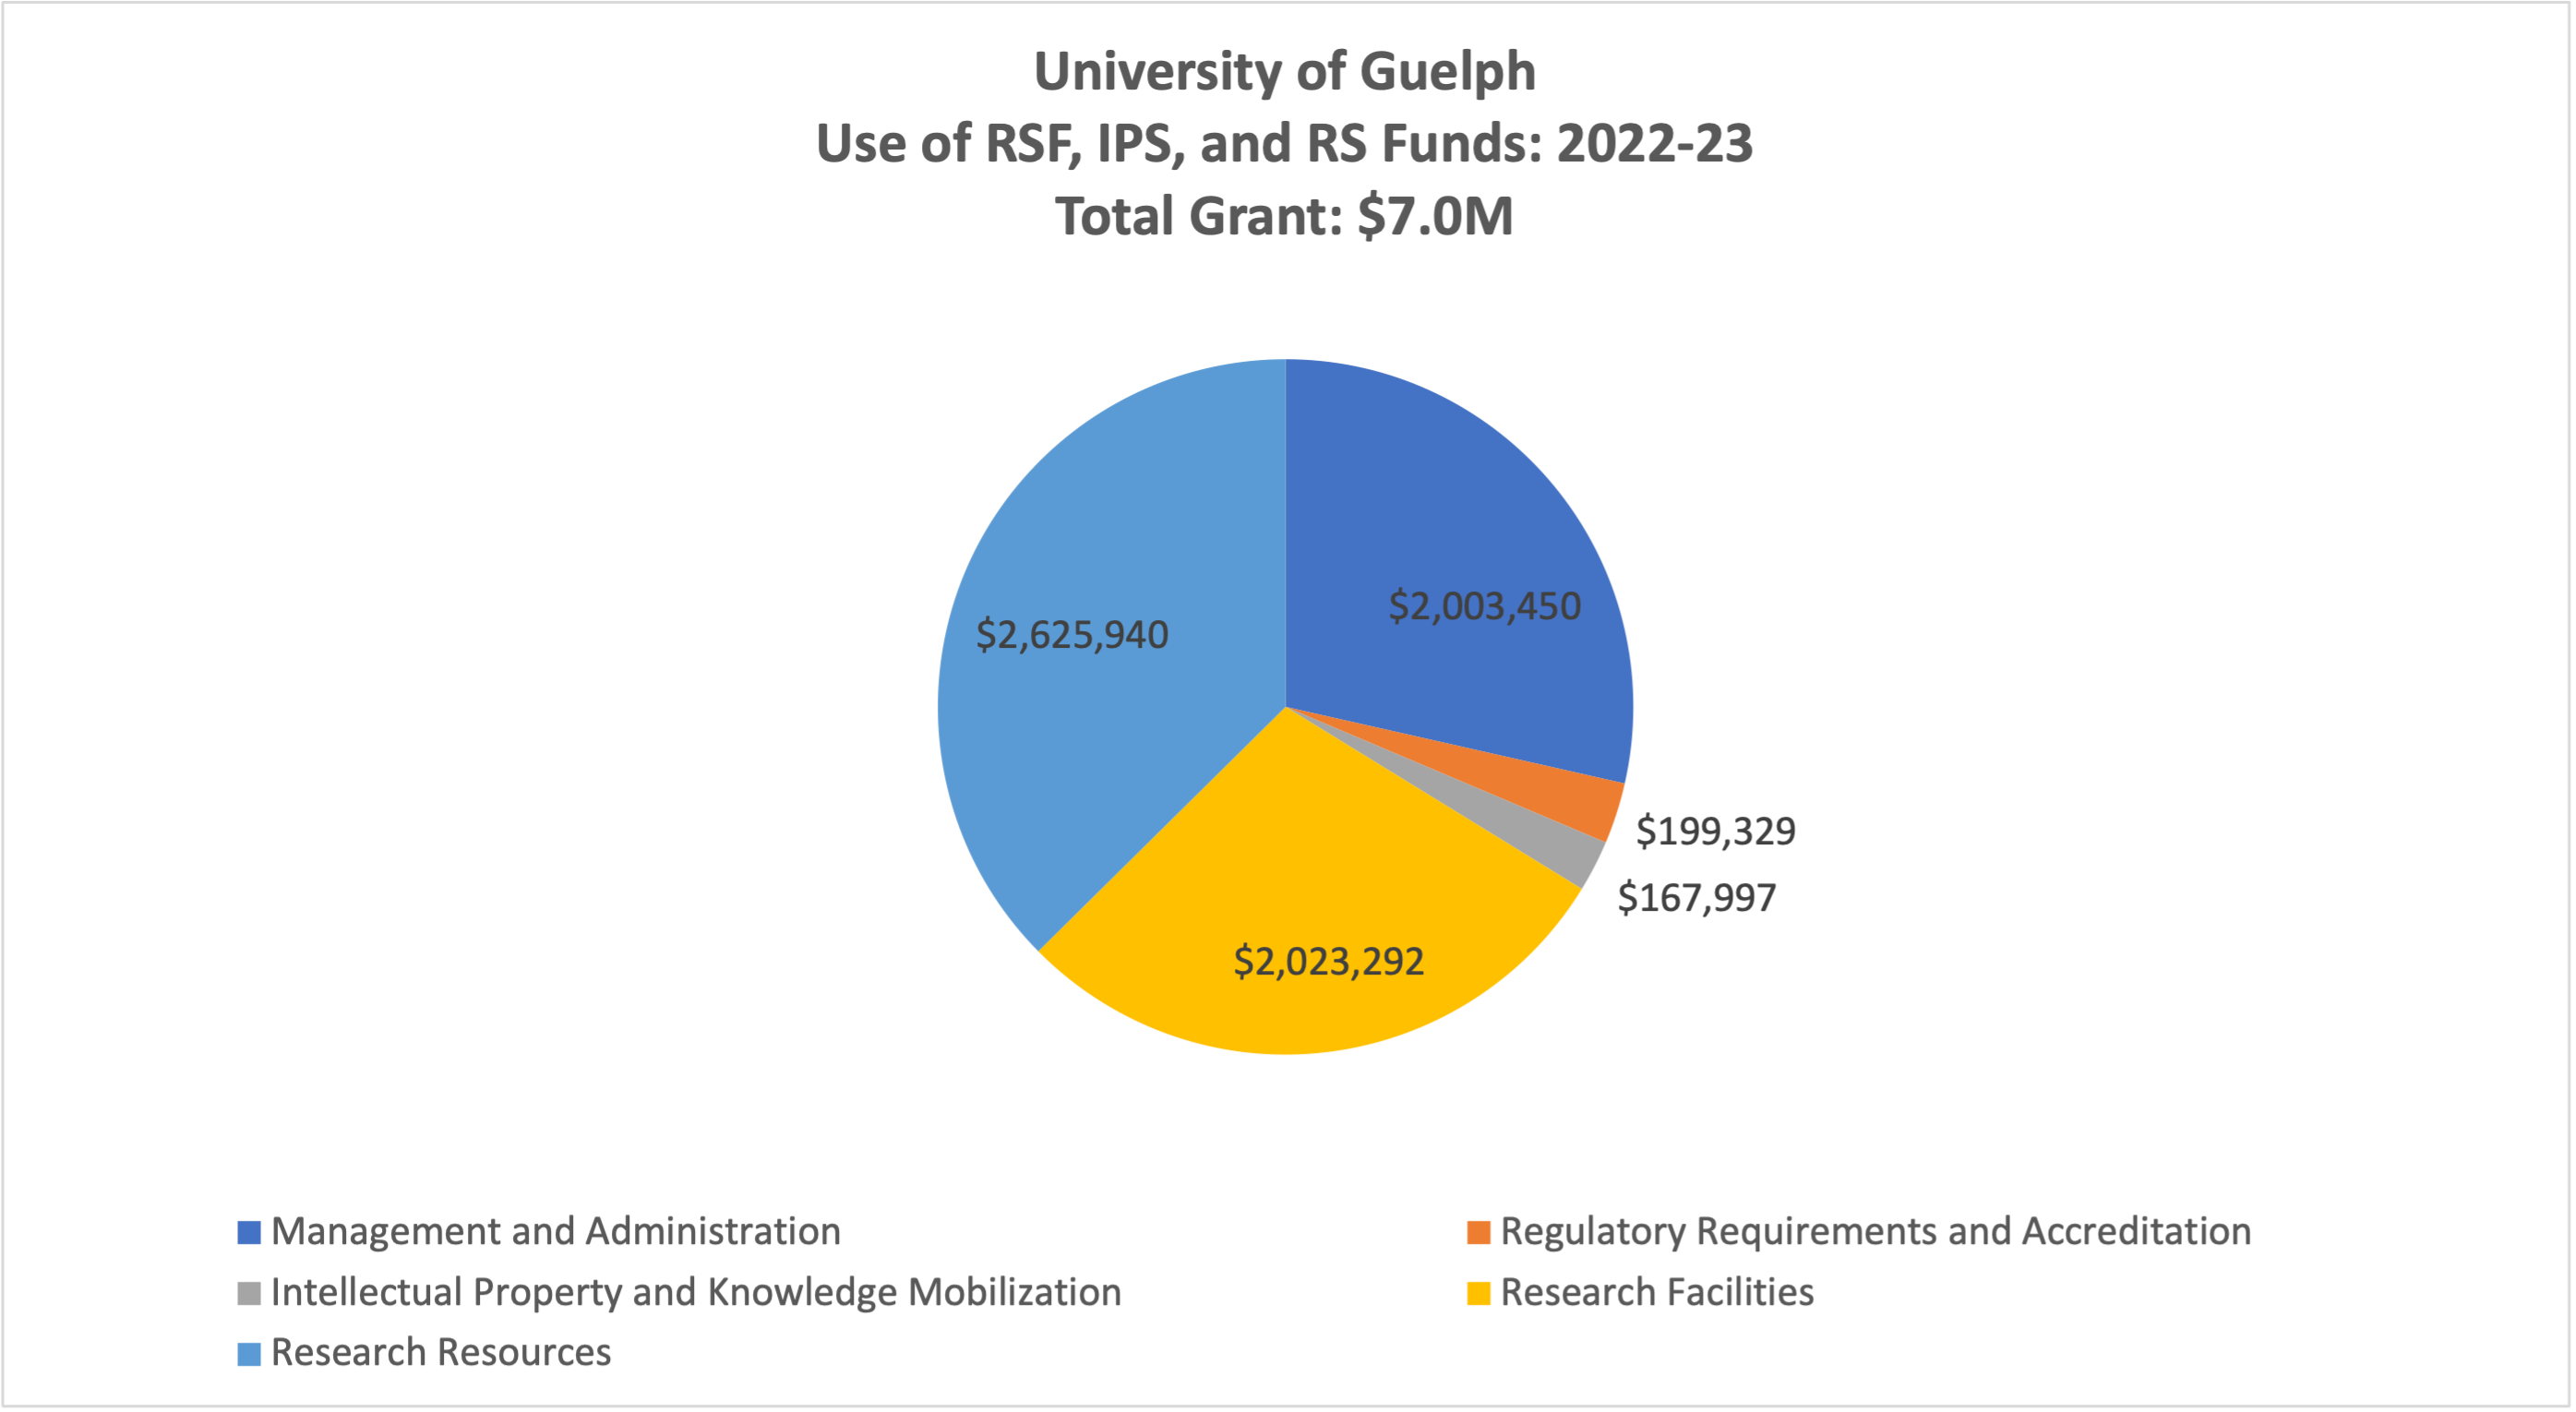 University of Guelph - Use of RSF, IPS and RS Funds: 2022-23 - Total Grant: $7.0M. Management and Administration - $2.0M. Regulatory Requirements and Accreditation - $0.2M. Intellectual Property and Knowledge Mobilization - $0.2M. Research Facilities - $2.0M. Research Resources $2.6M.